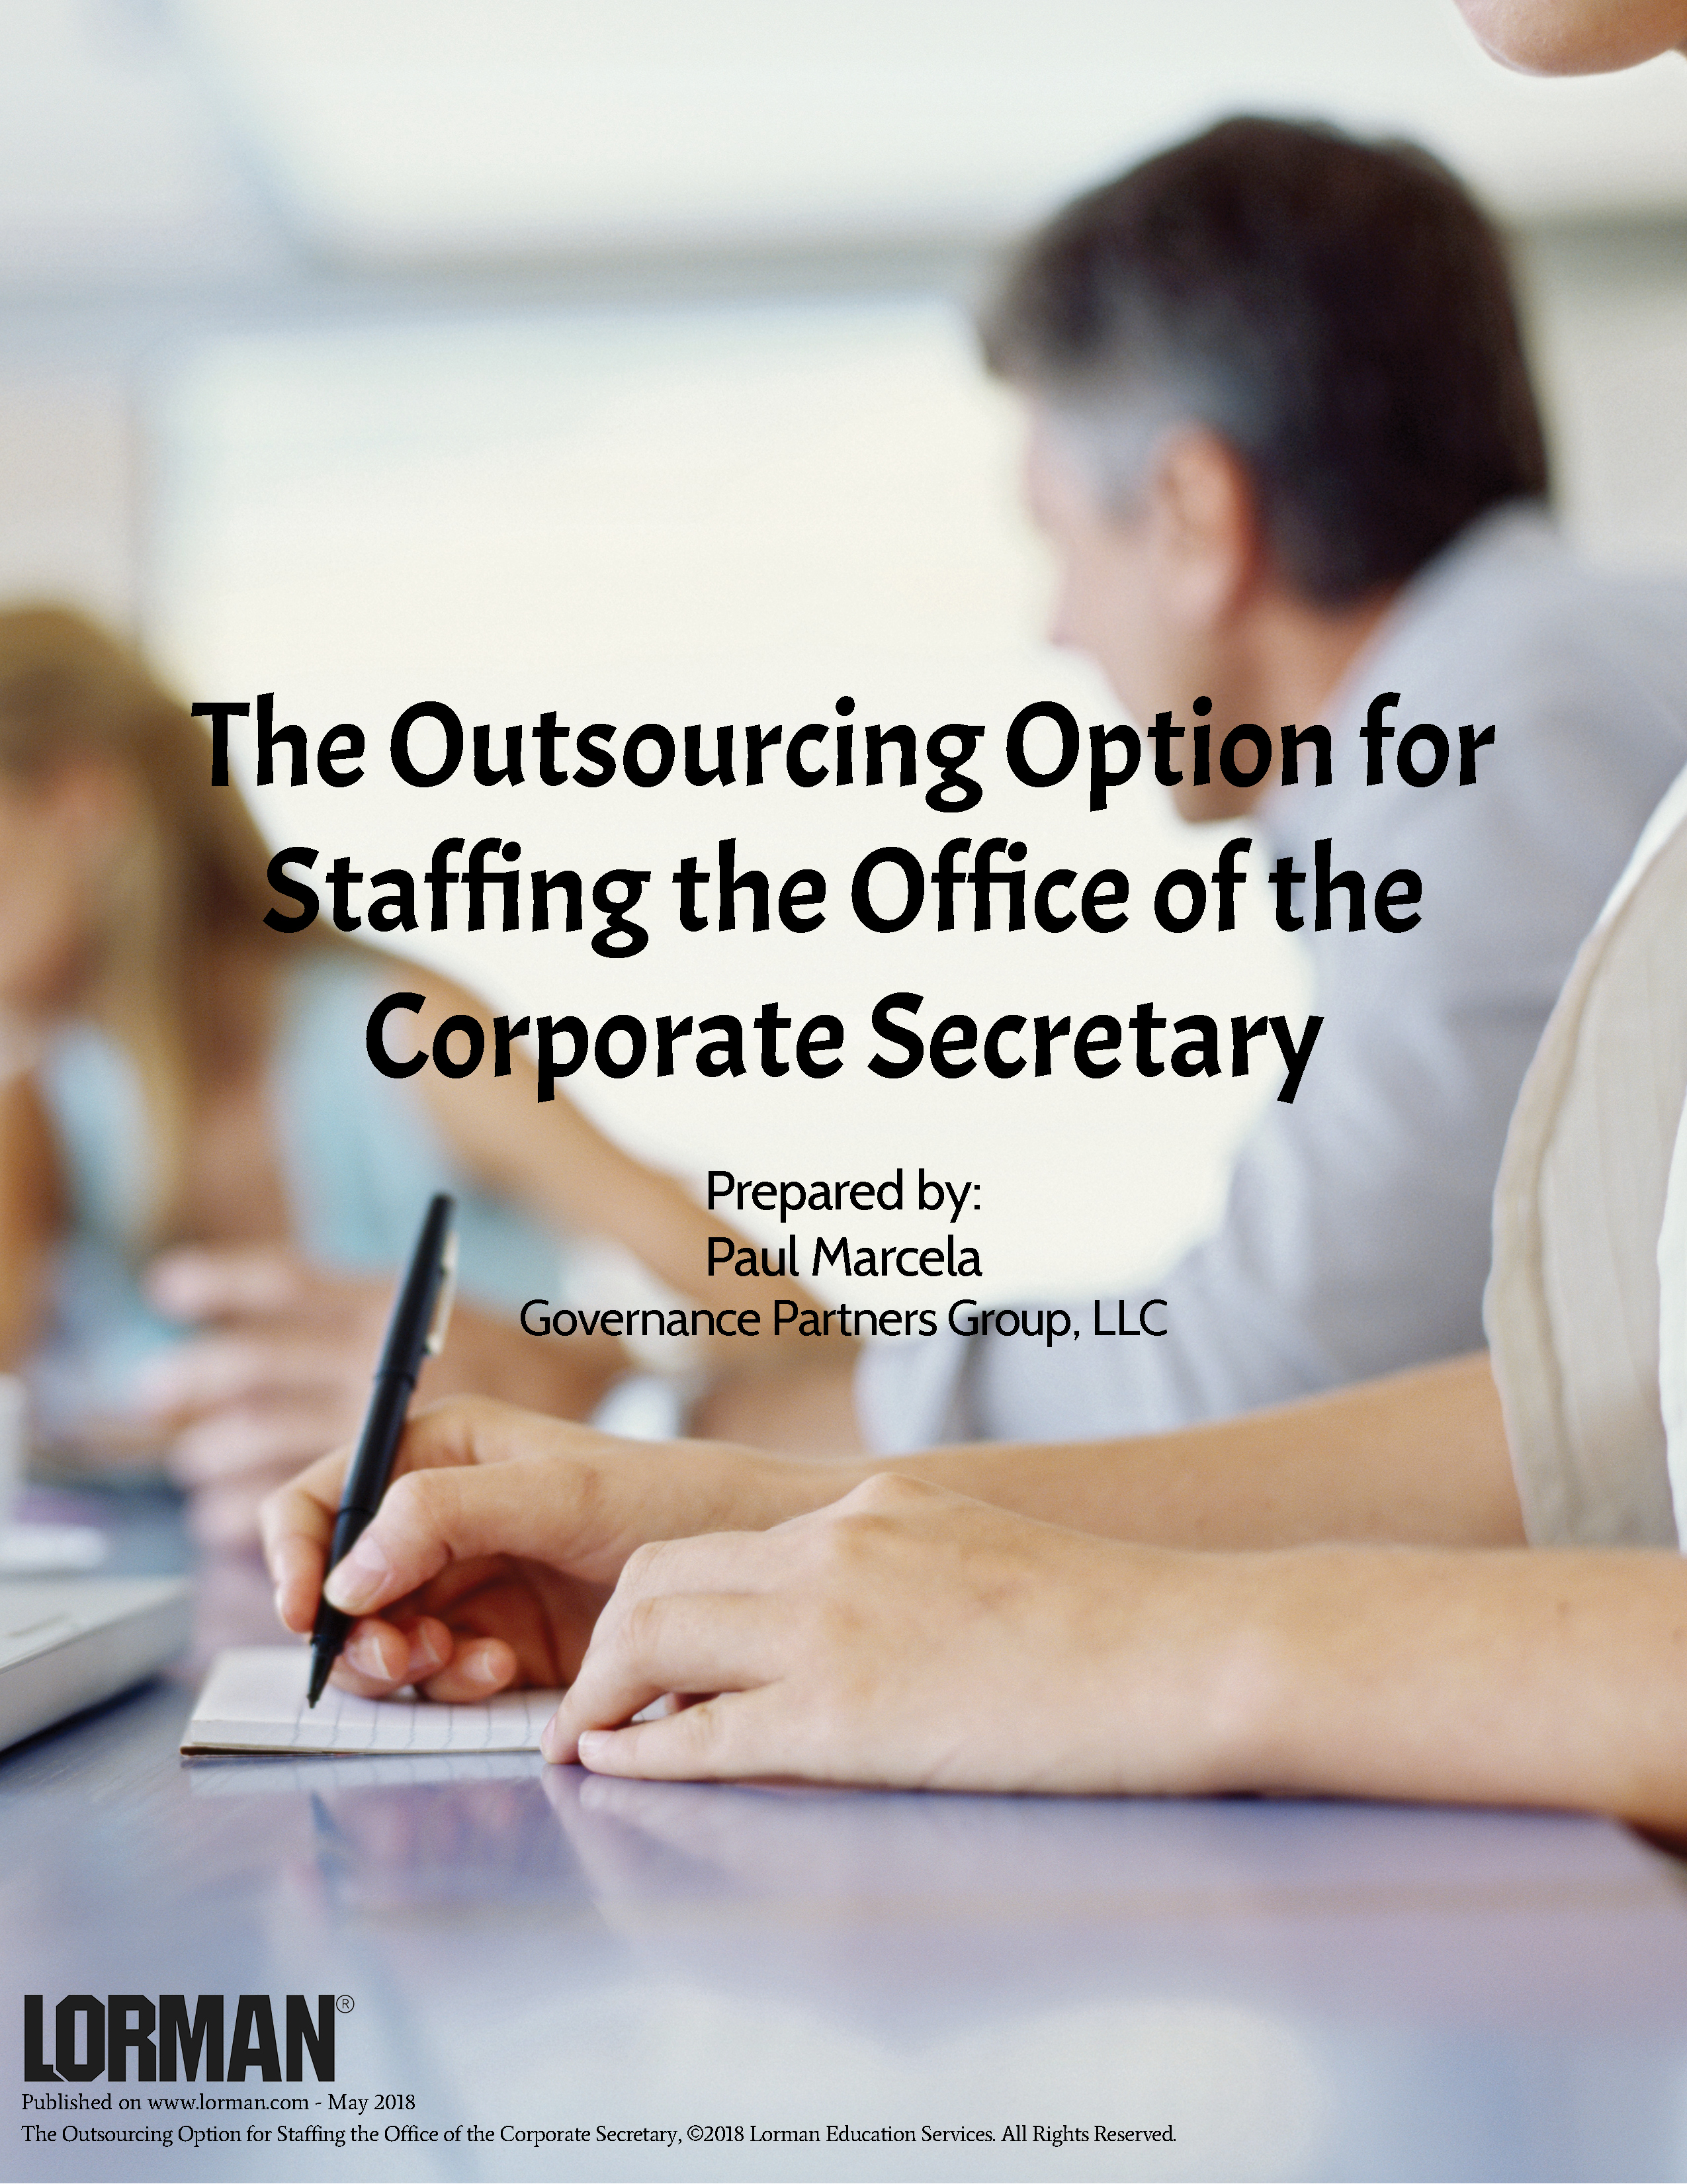 The Outsourcing Option for Staffing the Office of the Corporate Secretary